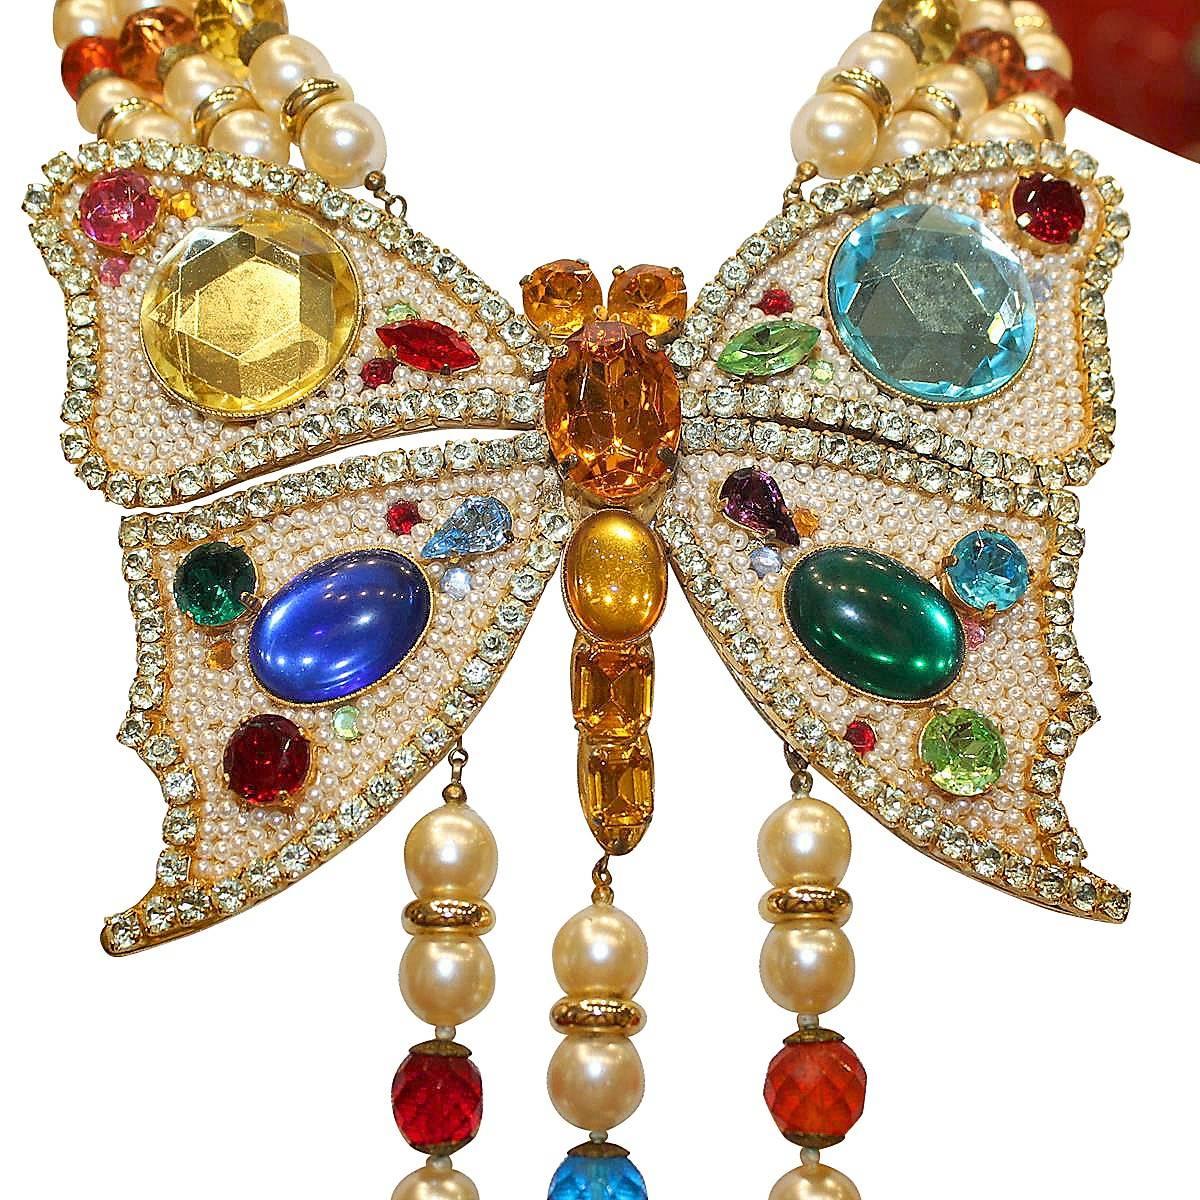 Magnificent and one of a kind collier by Carlo Zini
One of the greatest world's bijoux designers
Non allergenic rhodium
Giant multicolored butterfly
Amazing creation of swarovsky crystals, rhinestones and resins
Faux pearls and beads
Links, details